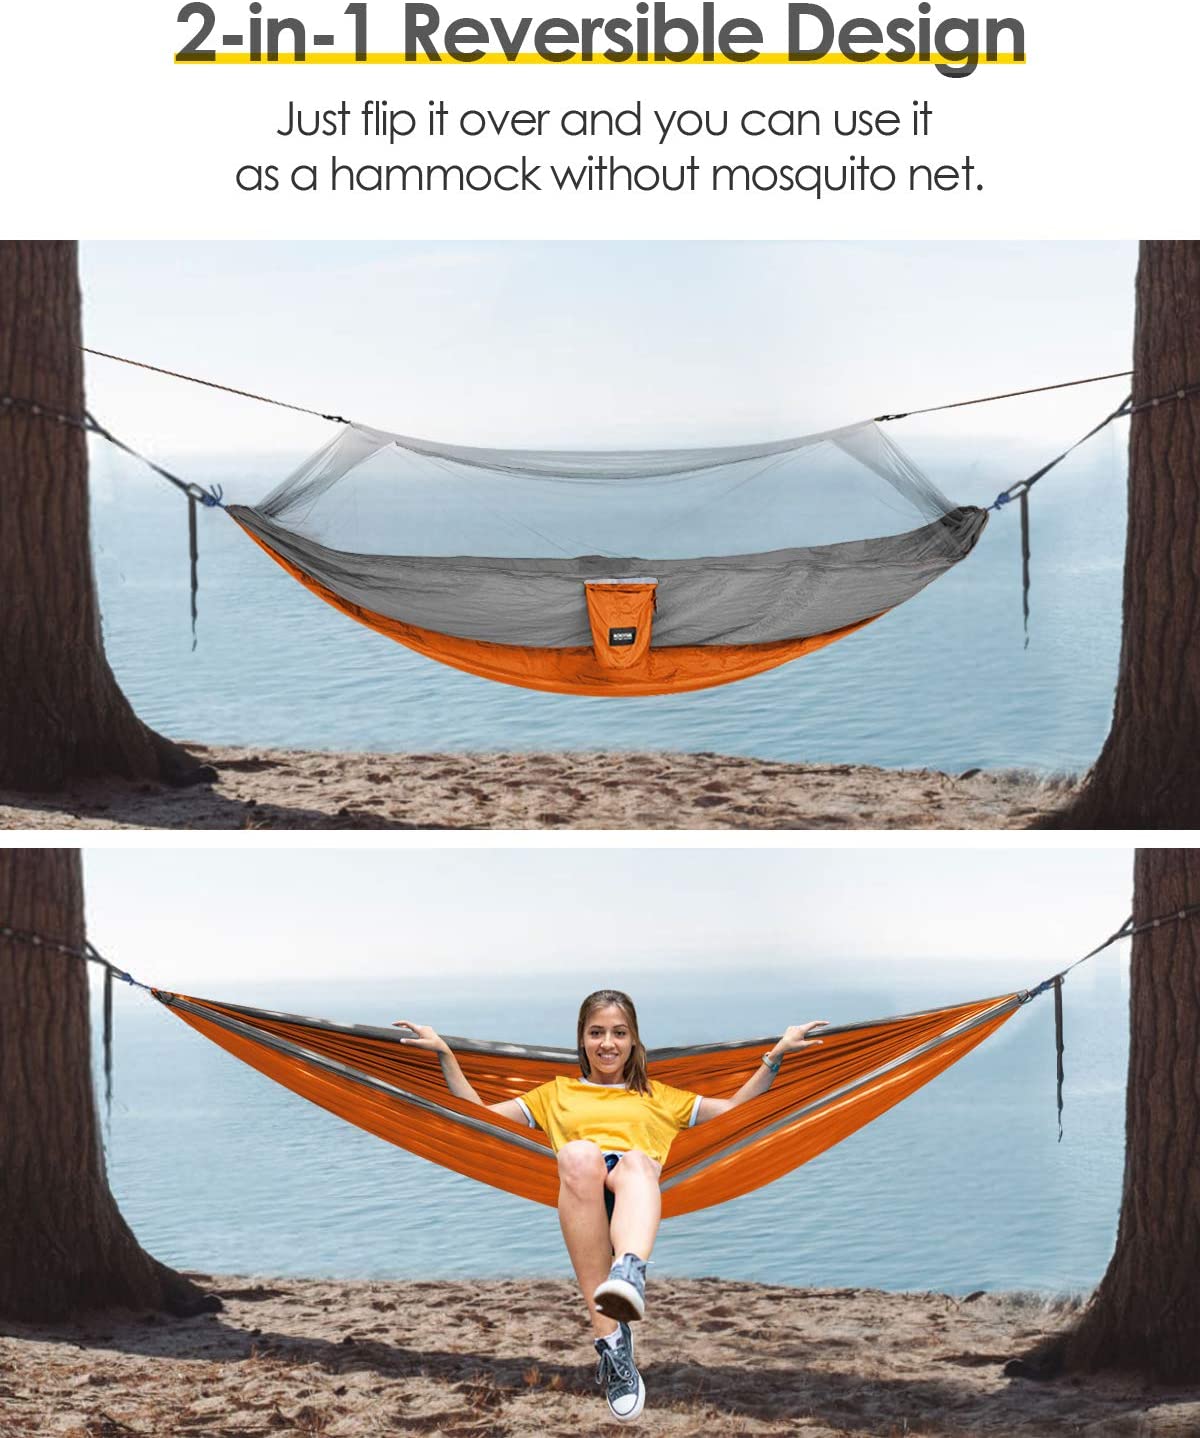 Kootek Camping Hammock with Mosquito Net Double & Single Portable Hammocks Parachute Lightweight Nylon with Tree Straps for Outdoor Adventures Backpacking Trips 